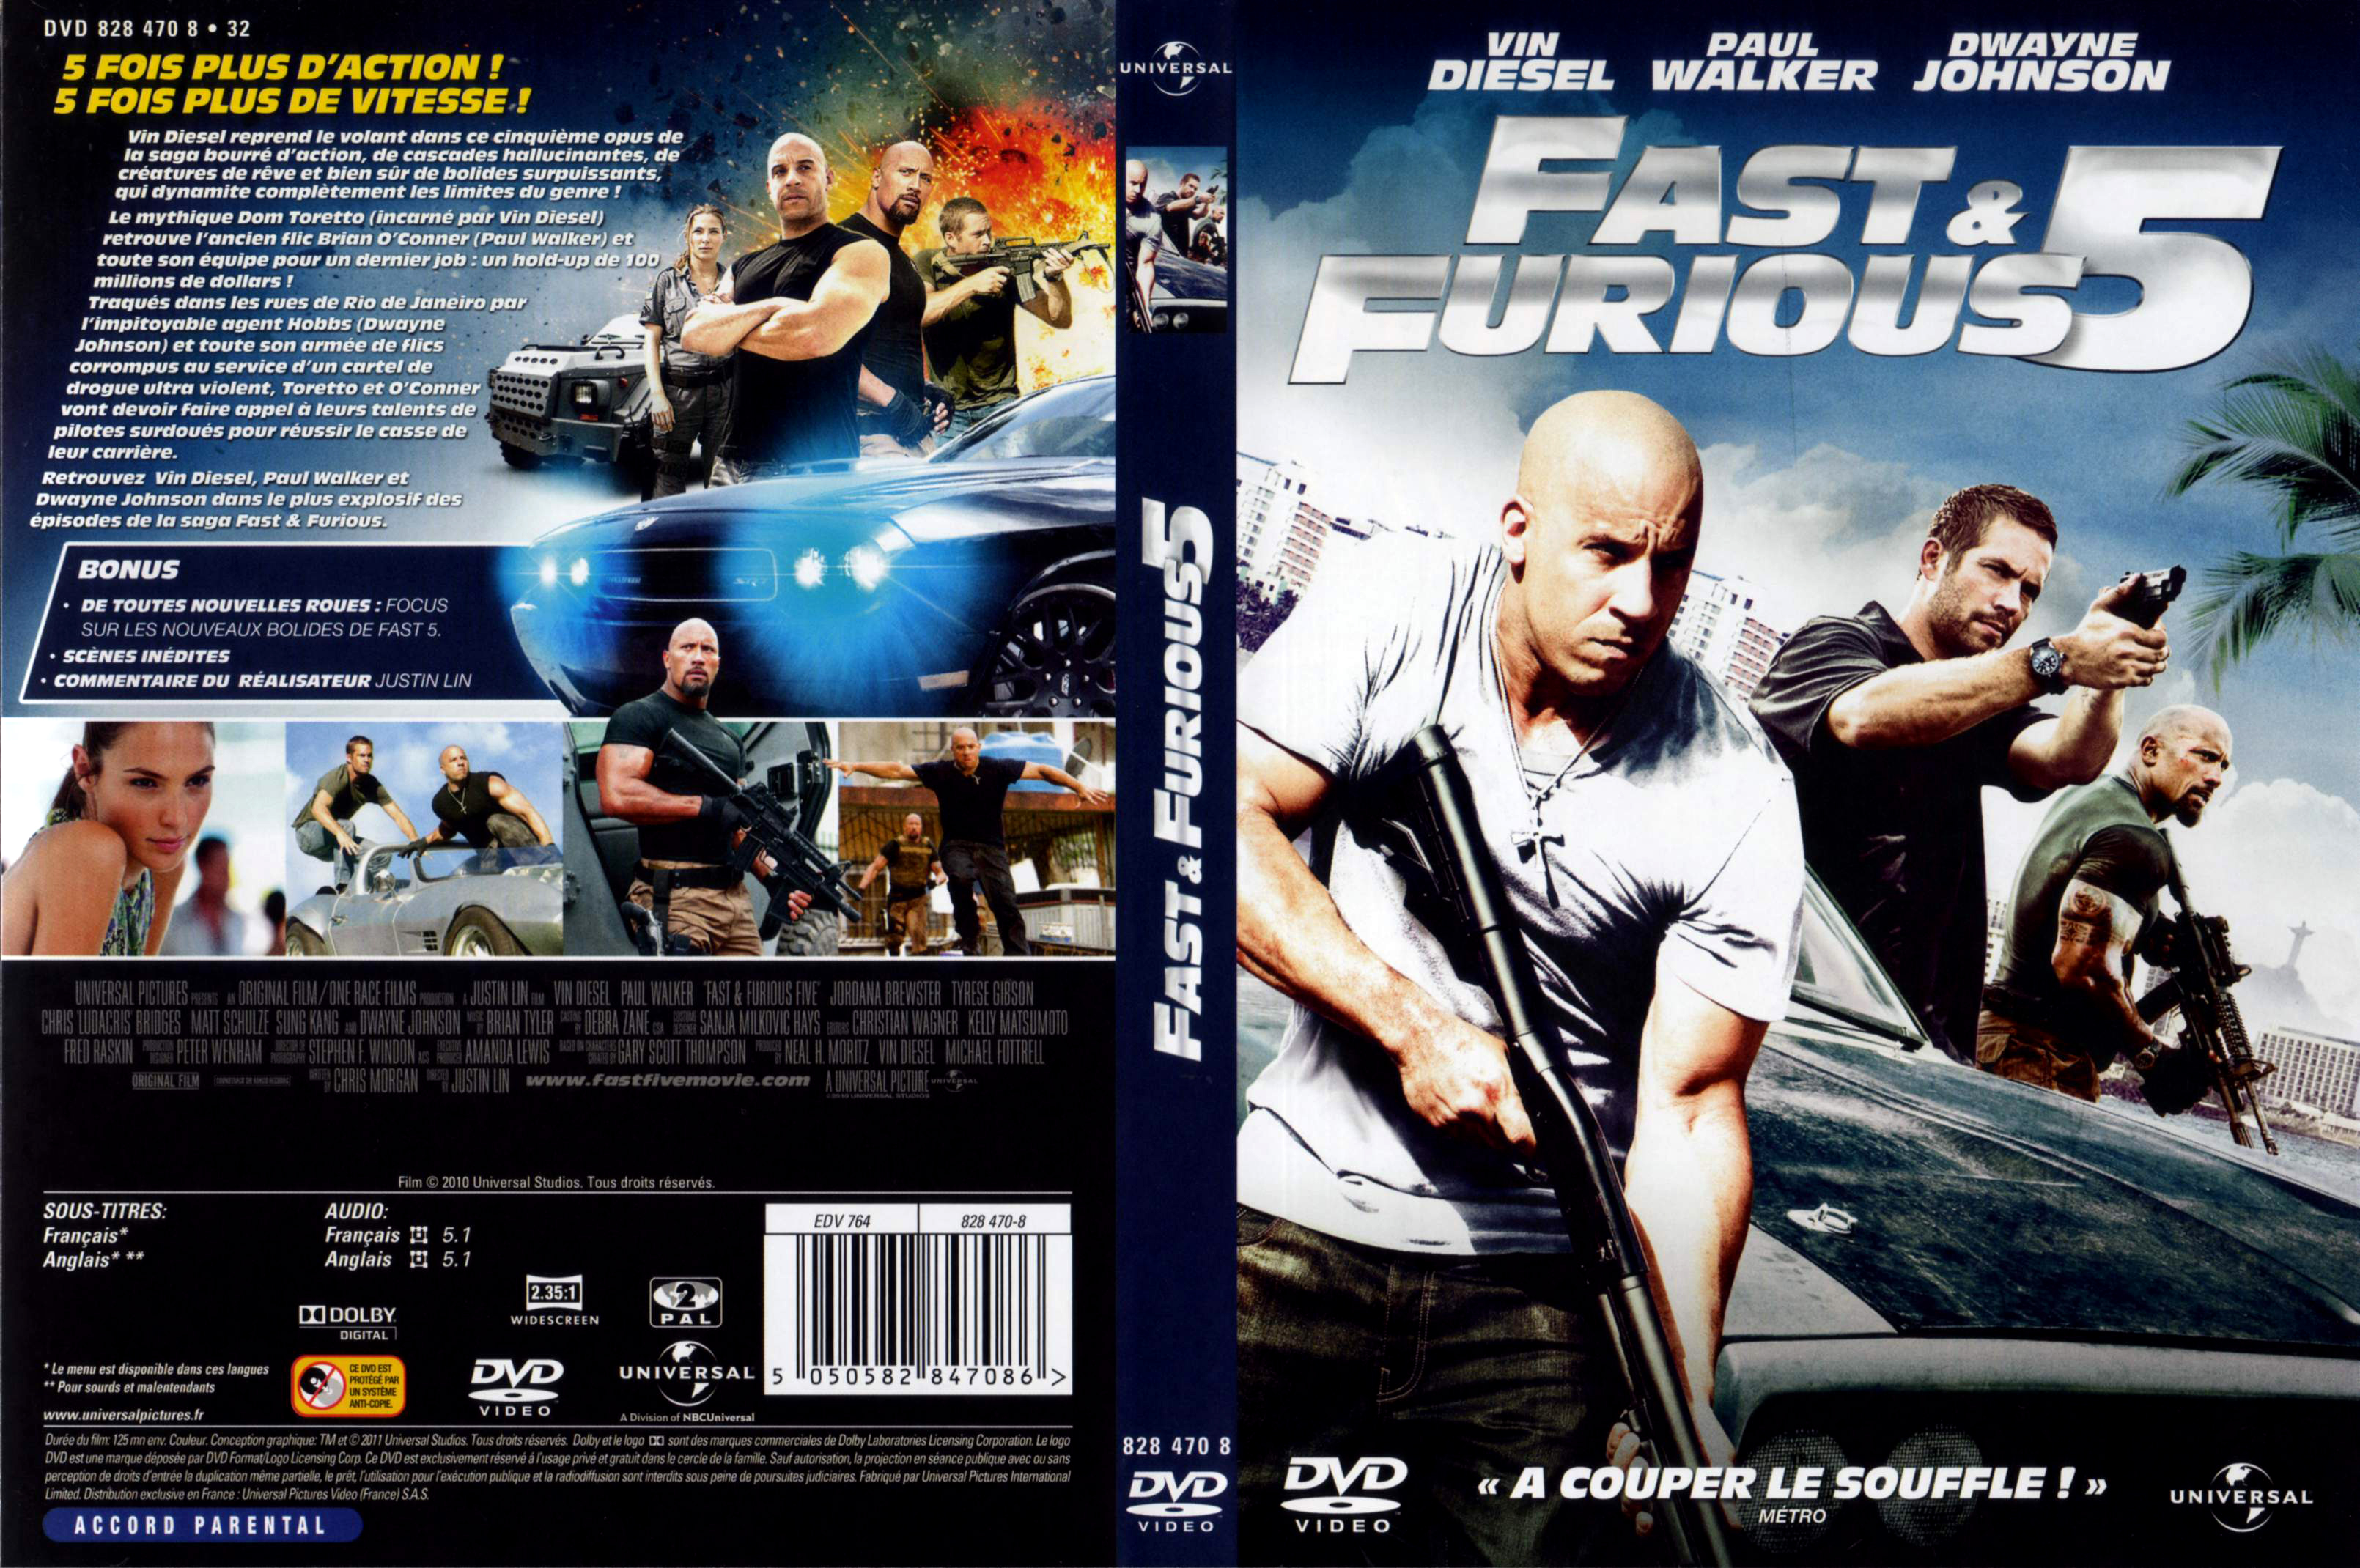 Jaquette DVD Fast and furious 5